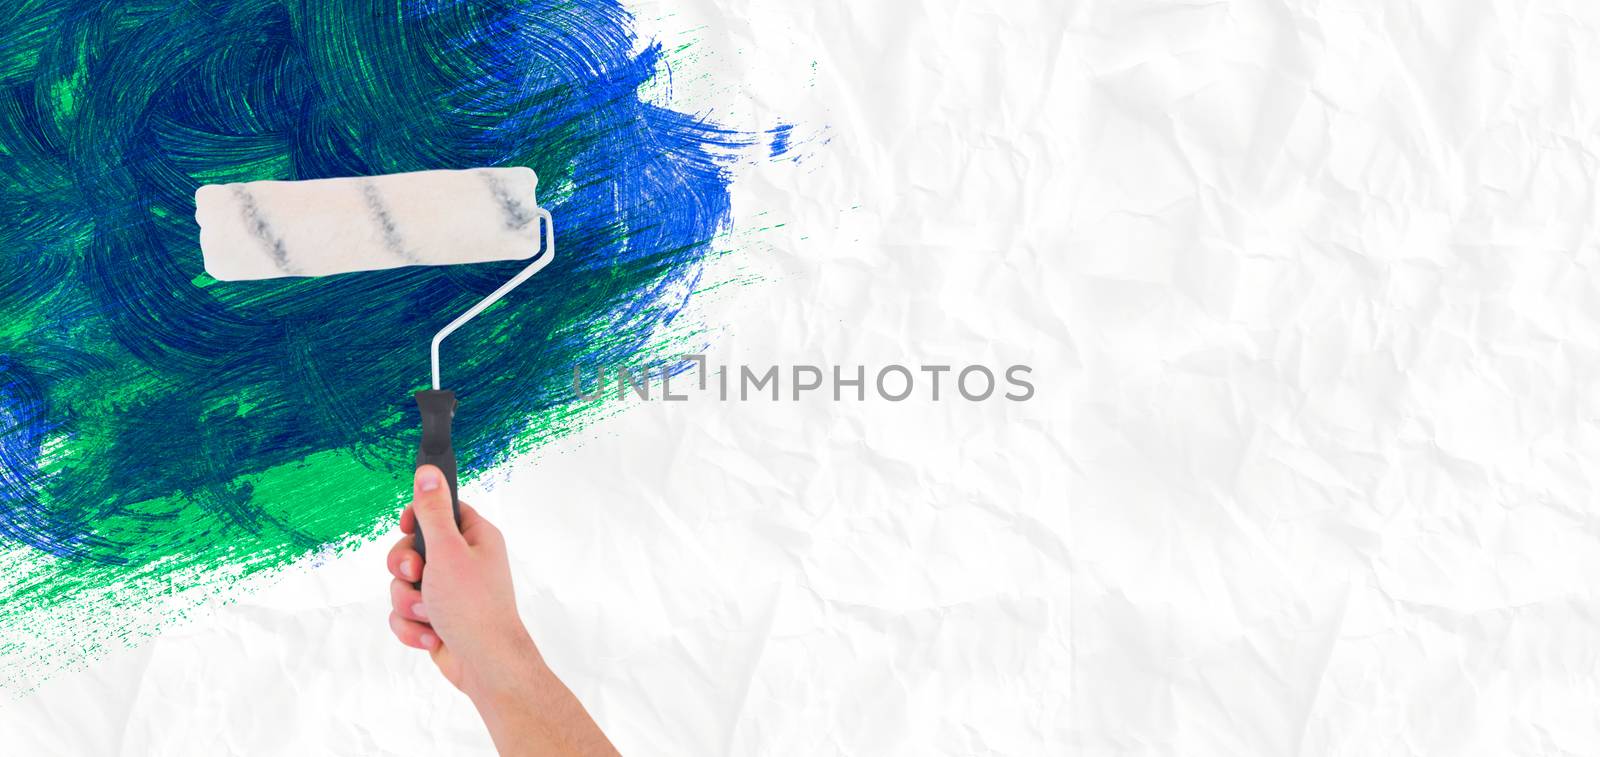 Handyman holding paint roller  against crumpled white page 